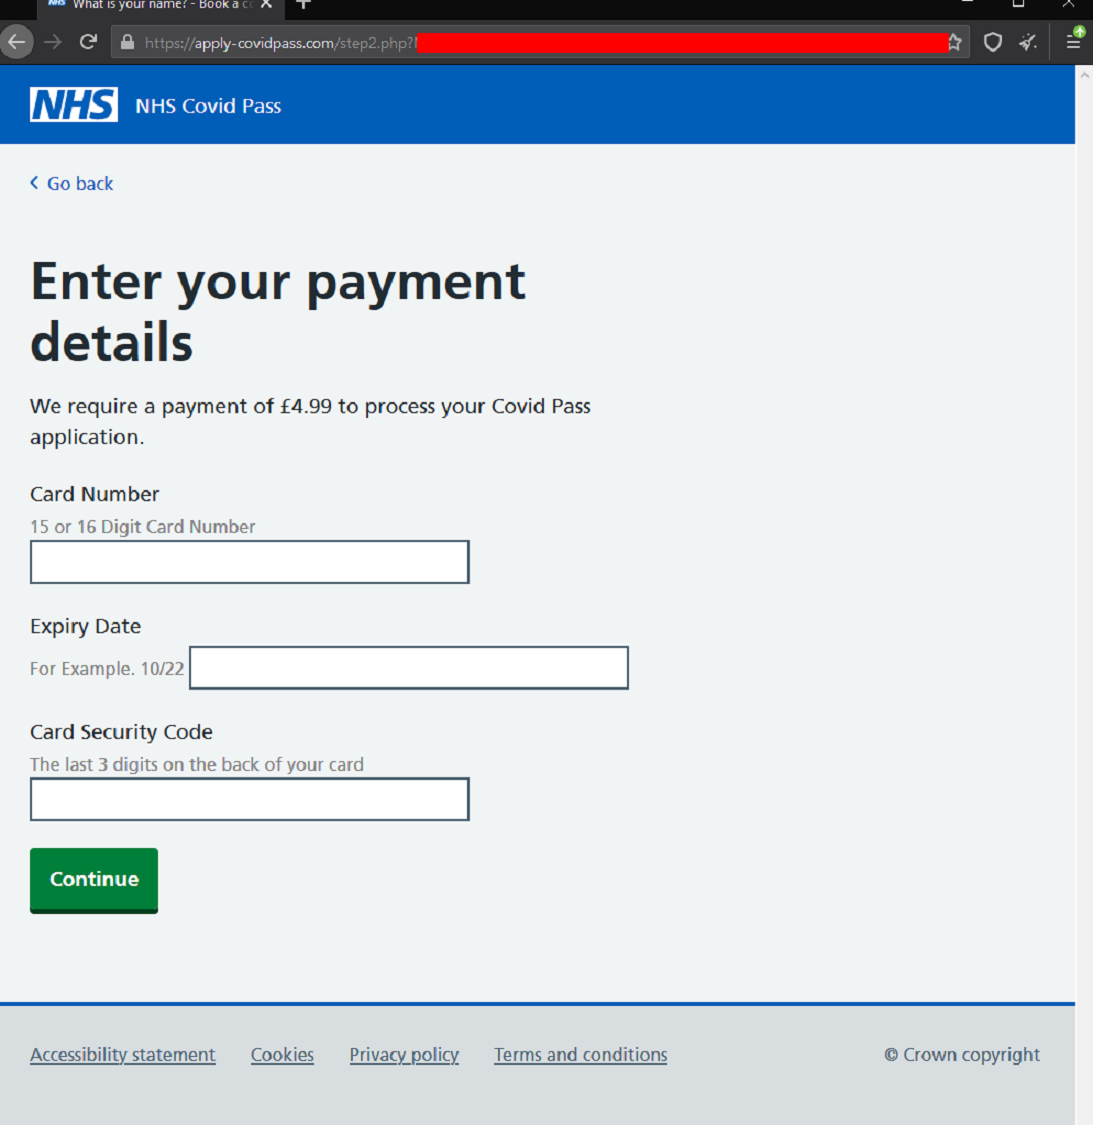 Screenshot of a webpage used as part of a scam targeting credit card details by posing as the NHS asking for payment to process a Covid Pass application